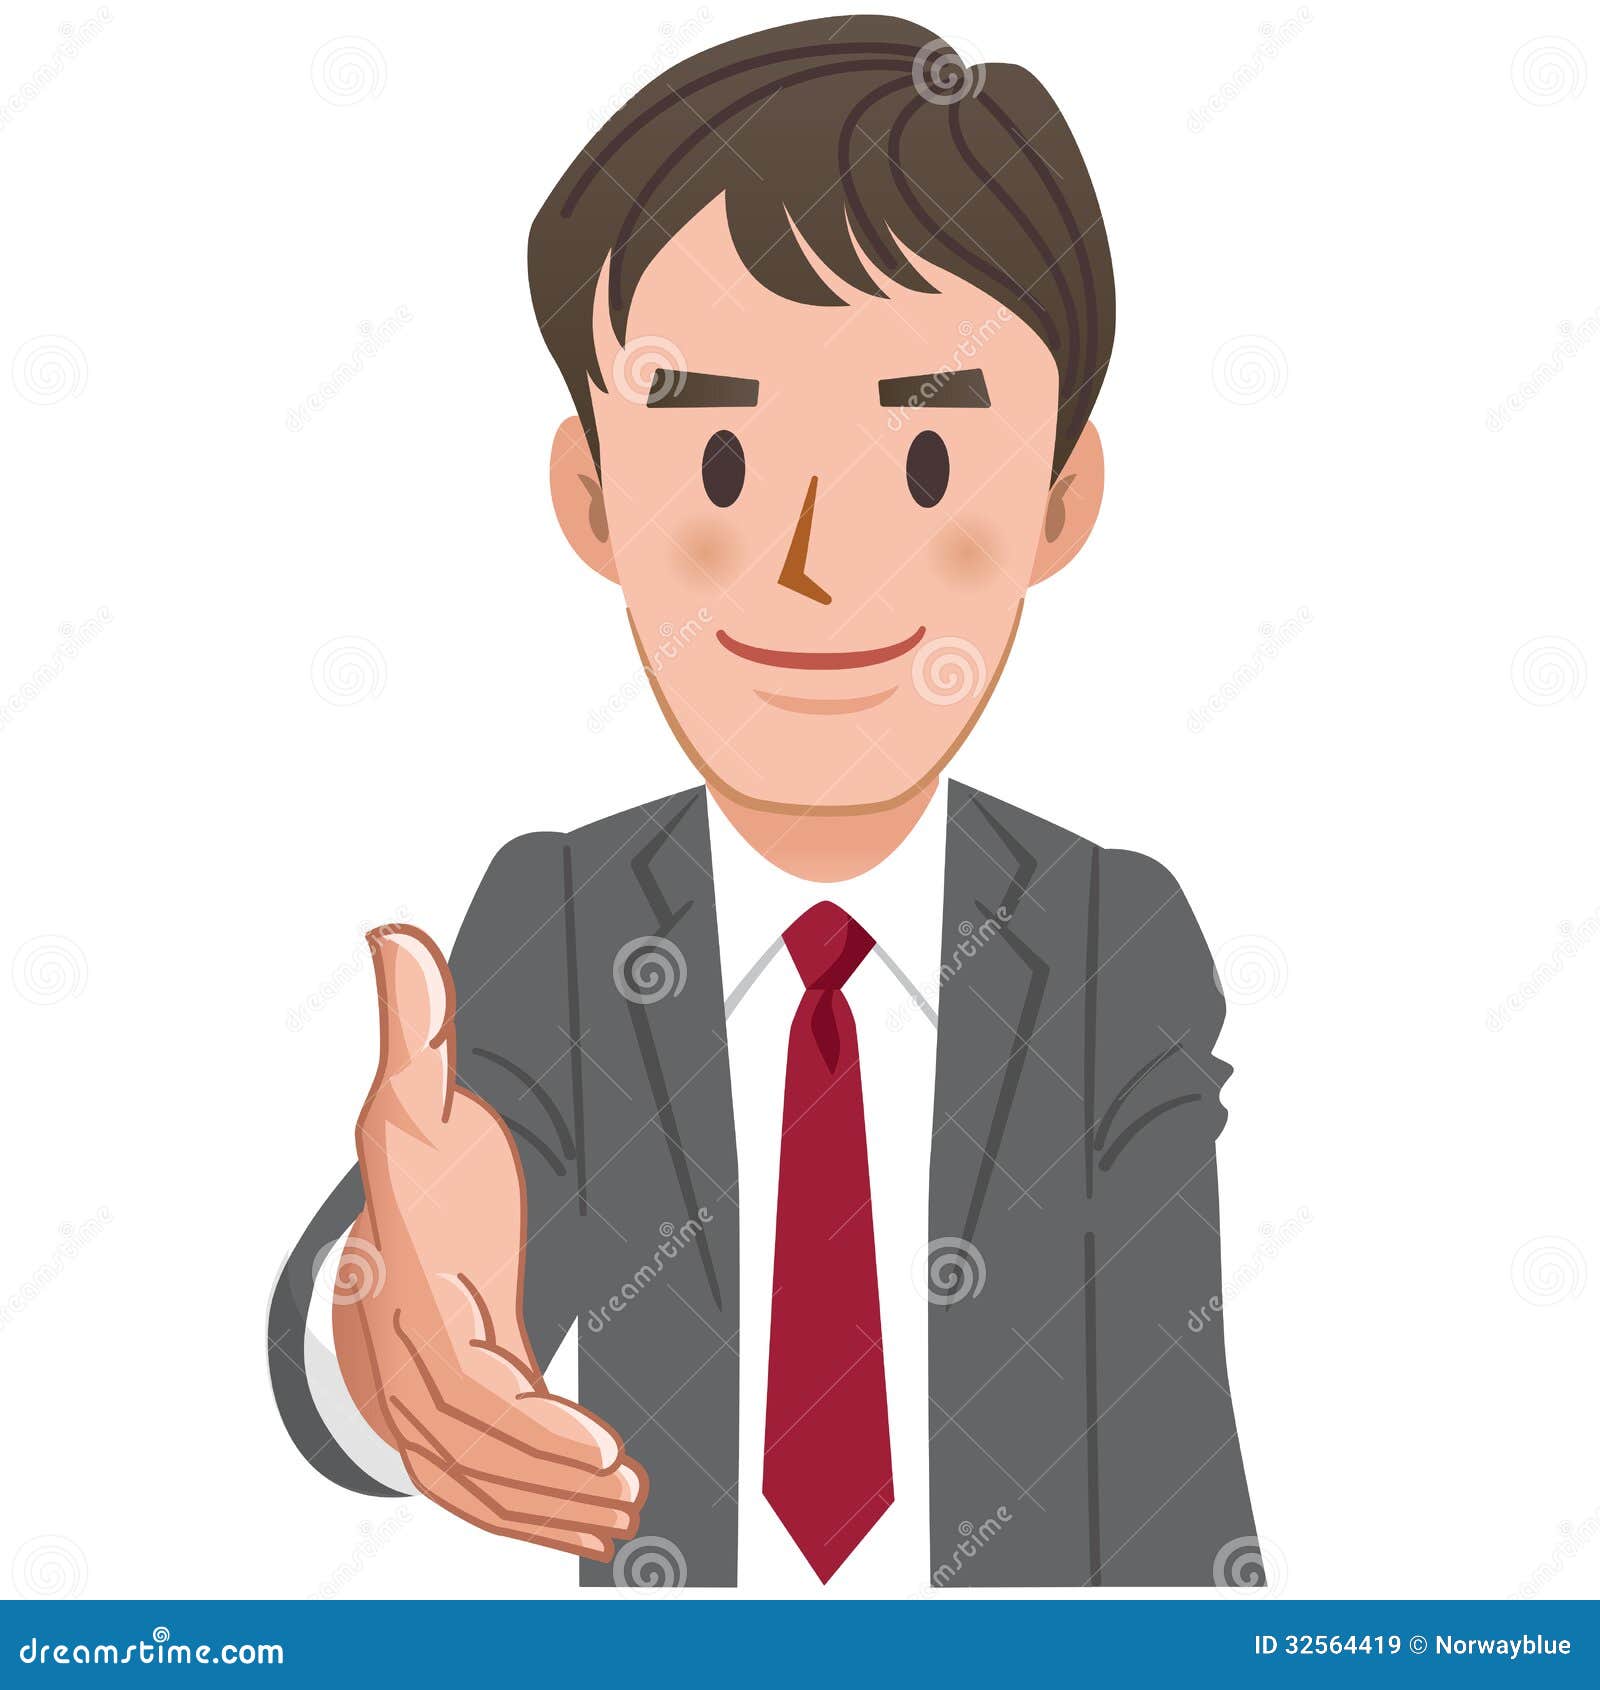 Cartoon Businessman Extending For A Handshake Royalty Free Stock Images